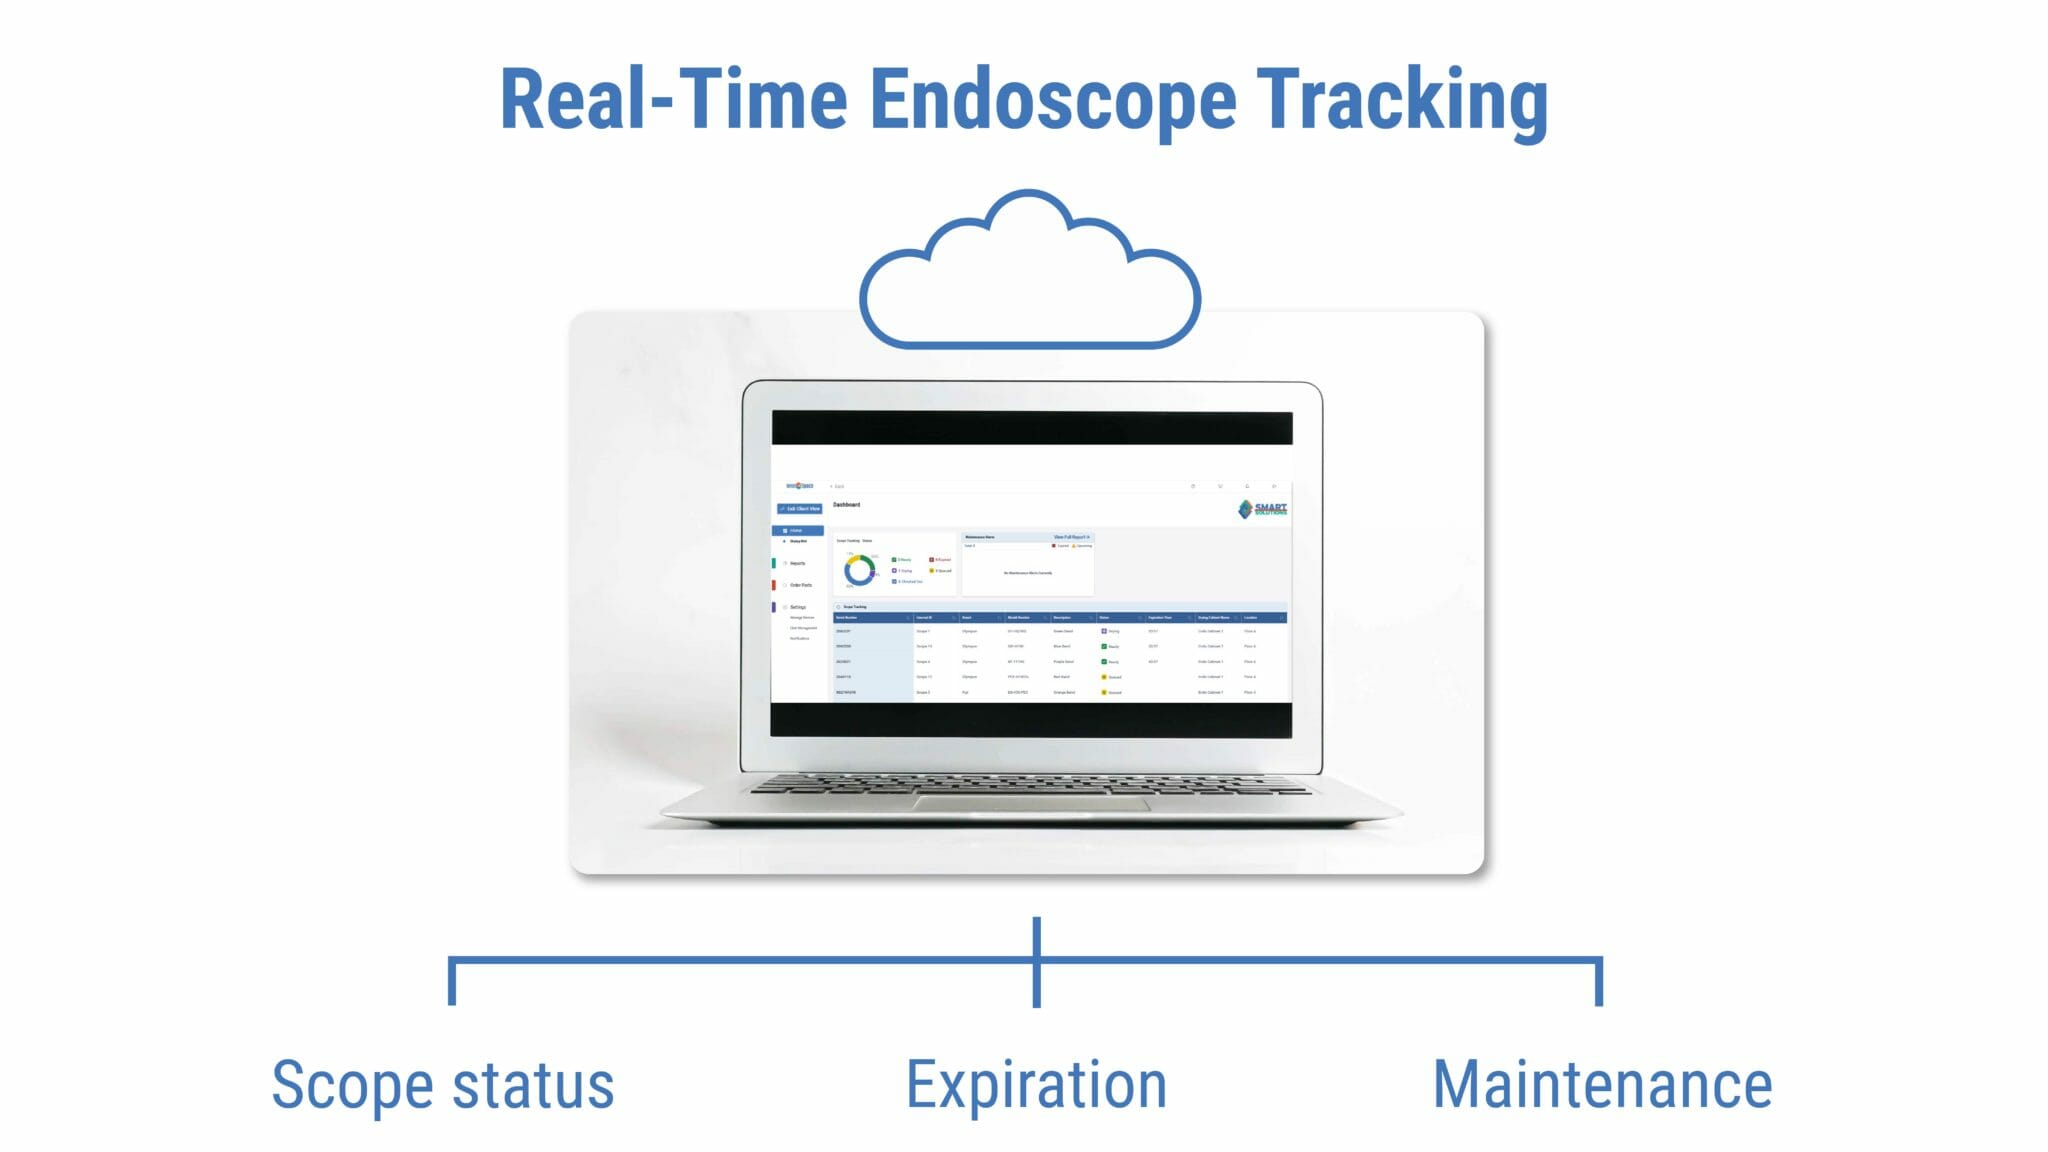 A laptop showing endoscope tracking information, with a cloud graphic above it